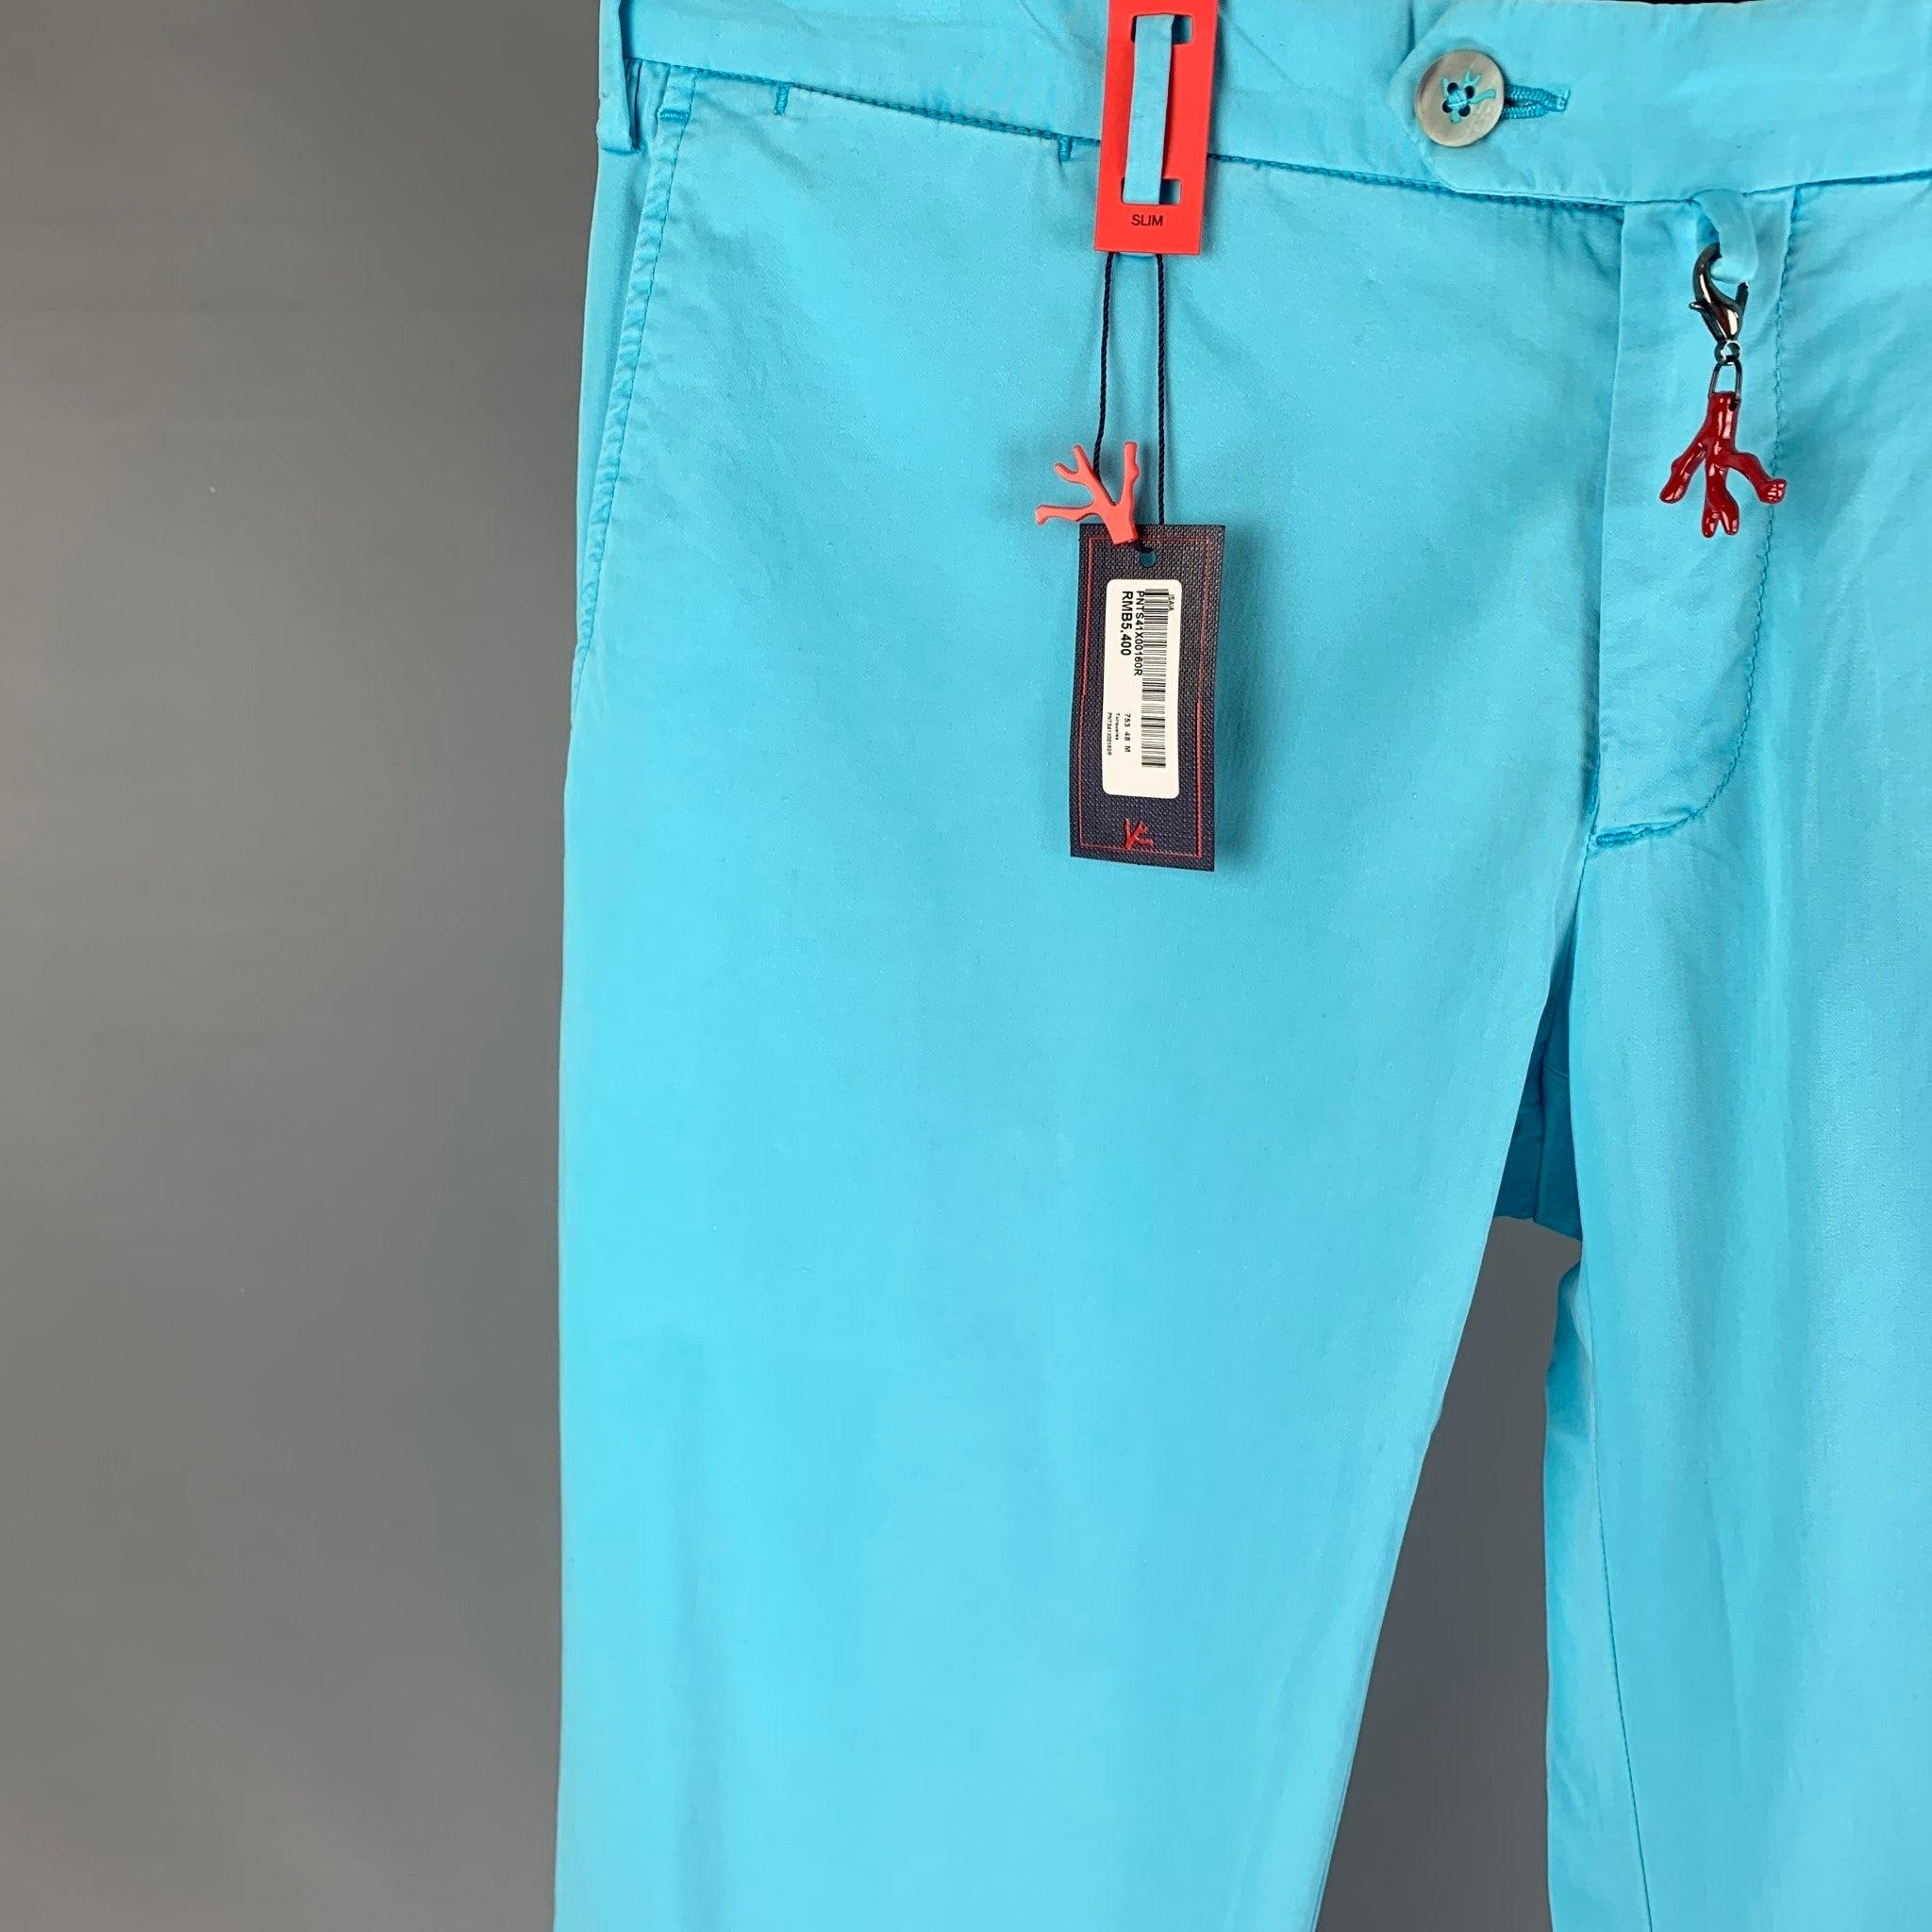 ISAIA pants comes in a aqua blue cotton featuring a slim fit, logo charm, and a zip fly closure. Made in Italy.
New with tags.
 

Marked:   48 R  

Measurements: 
  Waist: 32 inches Rise: 8.5 inches Inseam: 35 inches Leg Opening: 14 inches 
  
  
